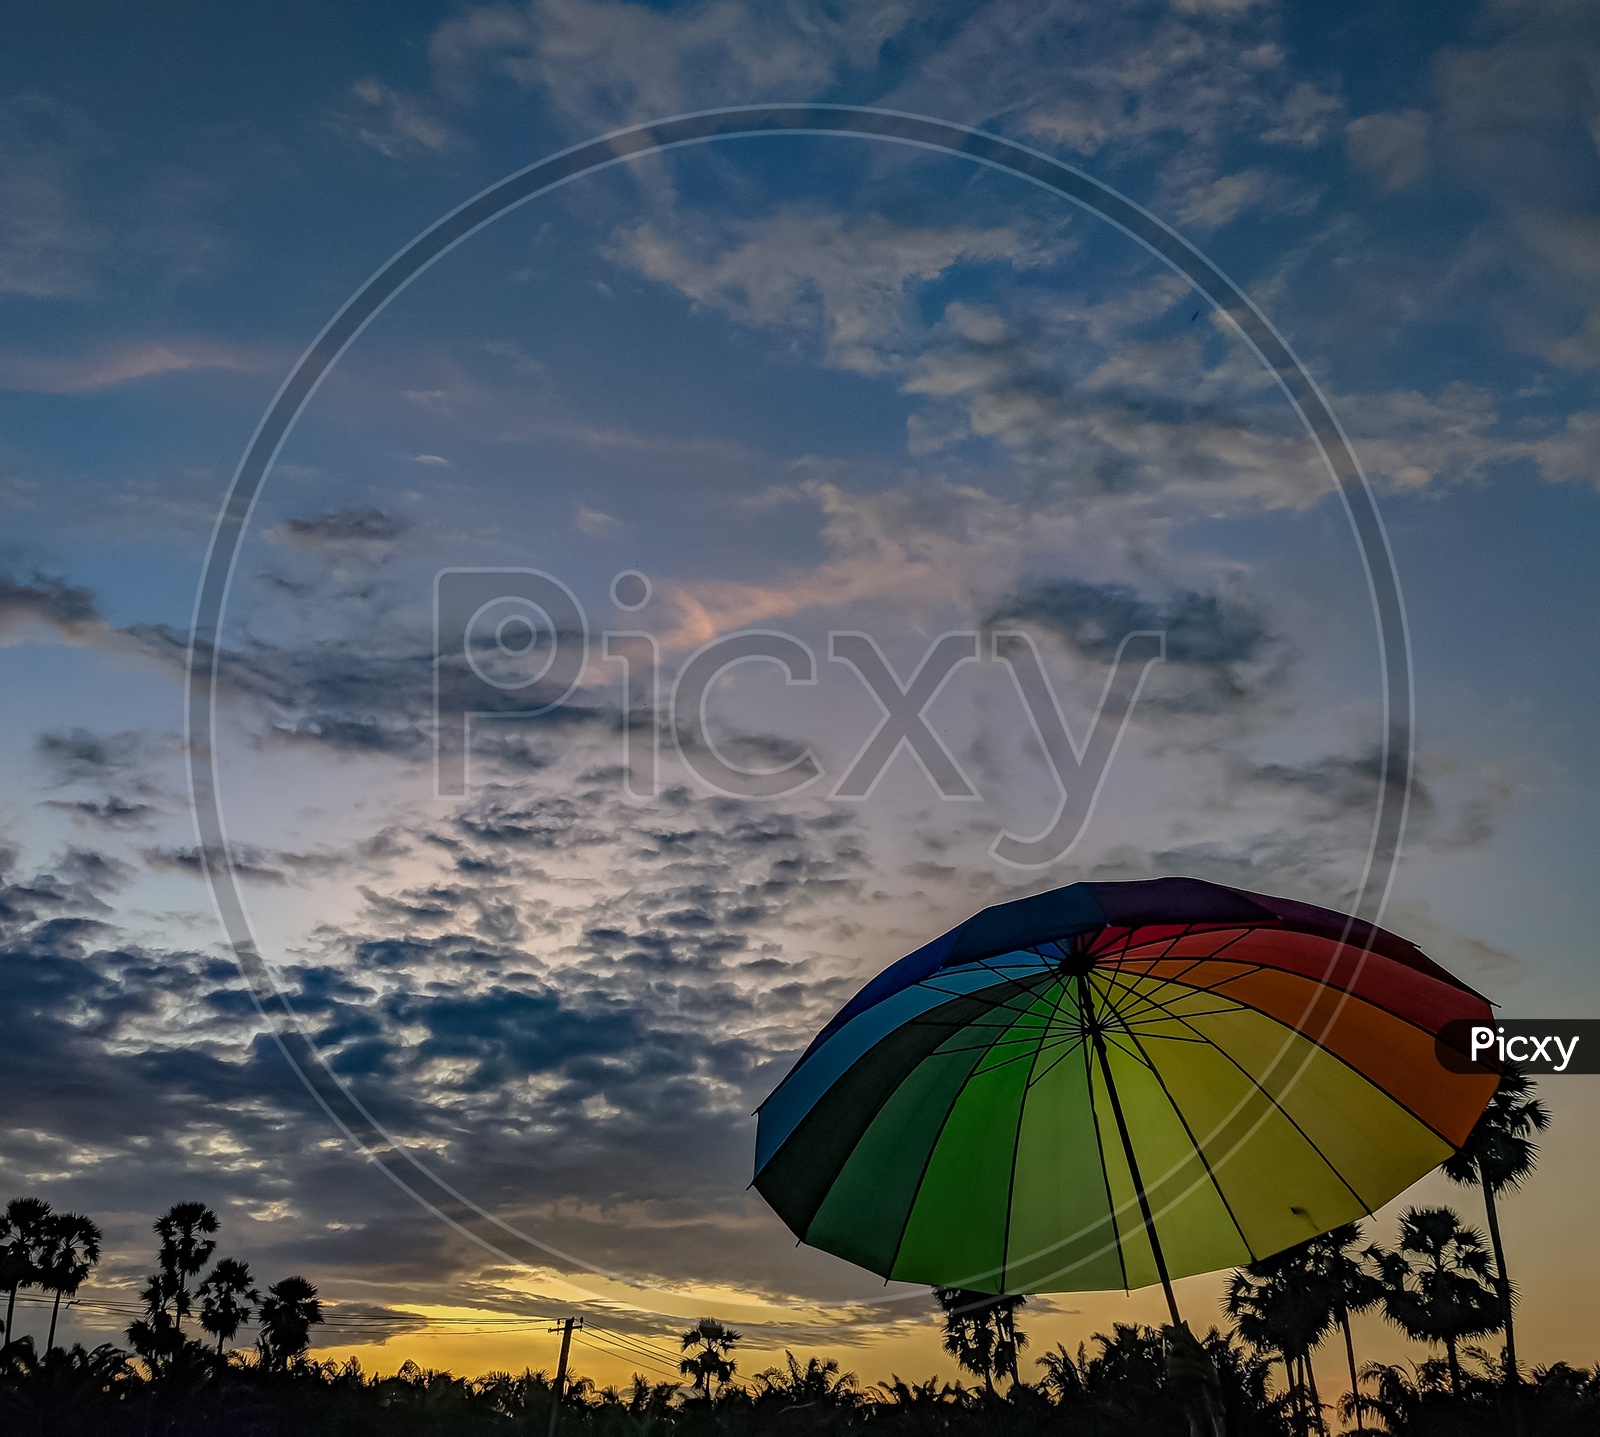 A Rainbow Coloured Umbrella over A Sunset Sky With Clouds In Background